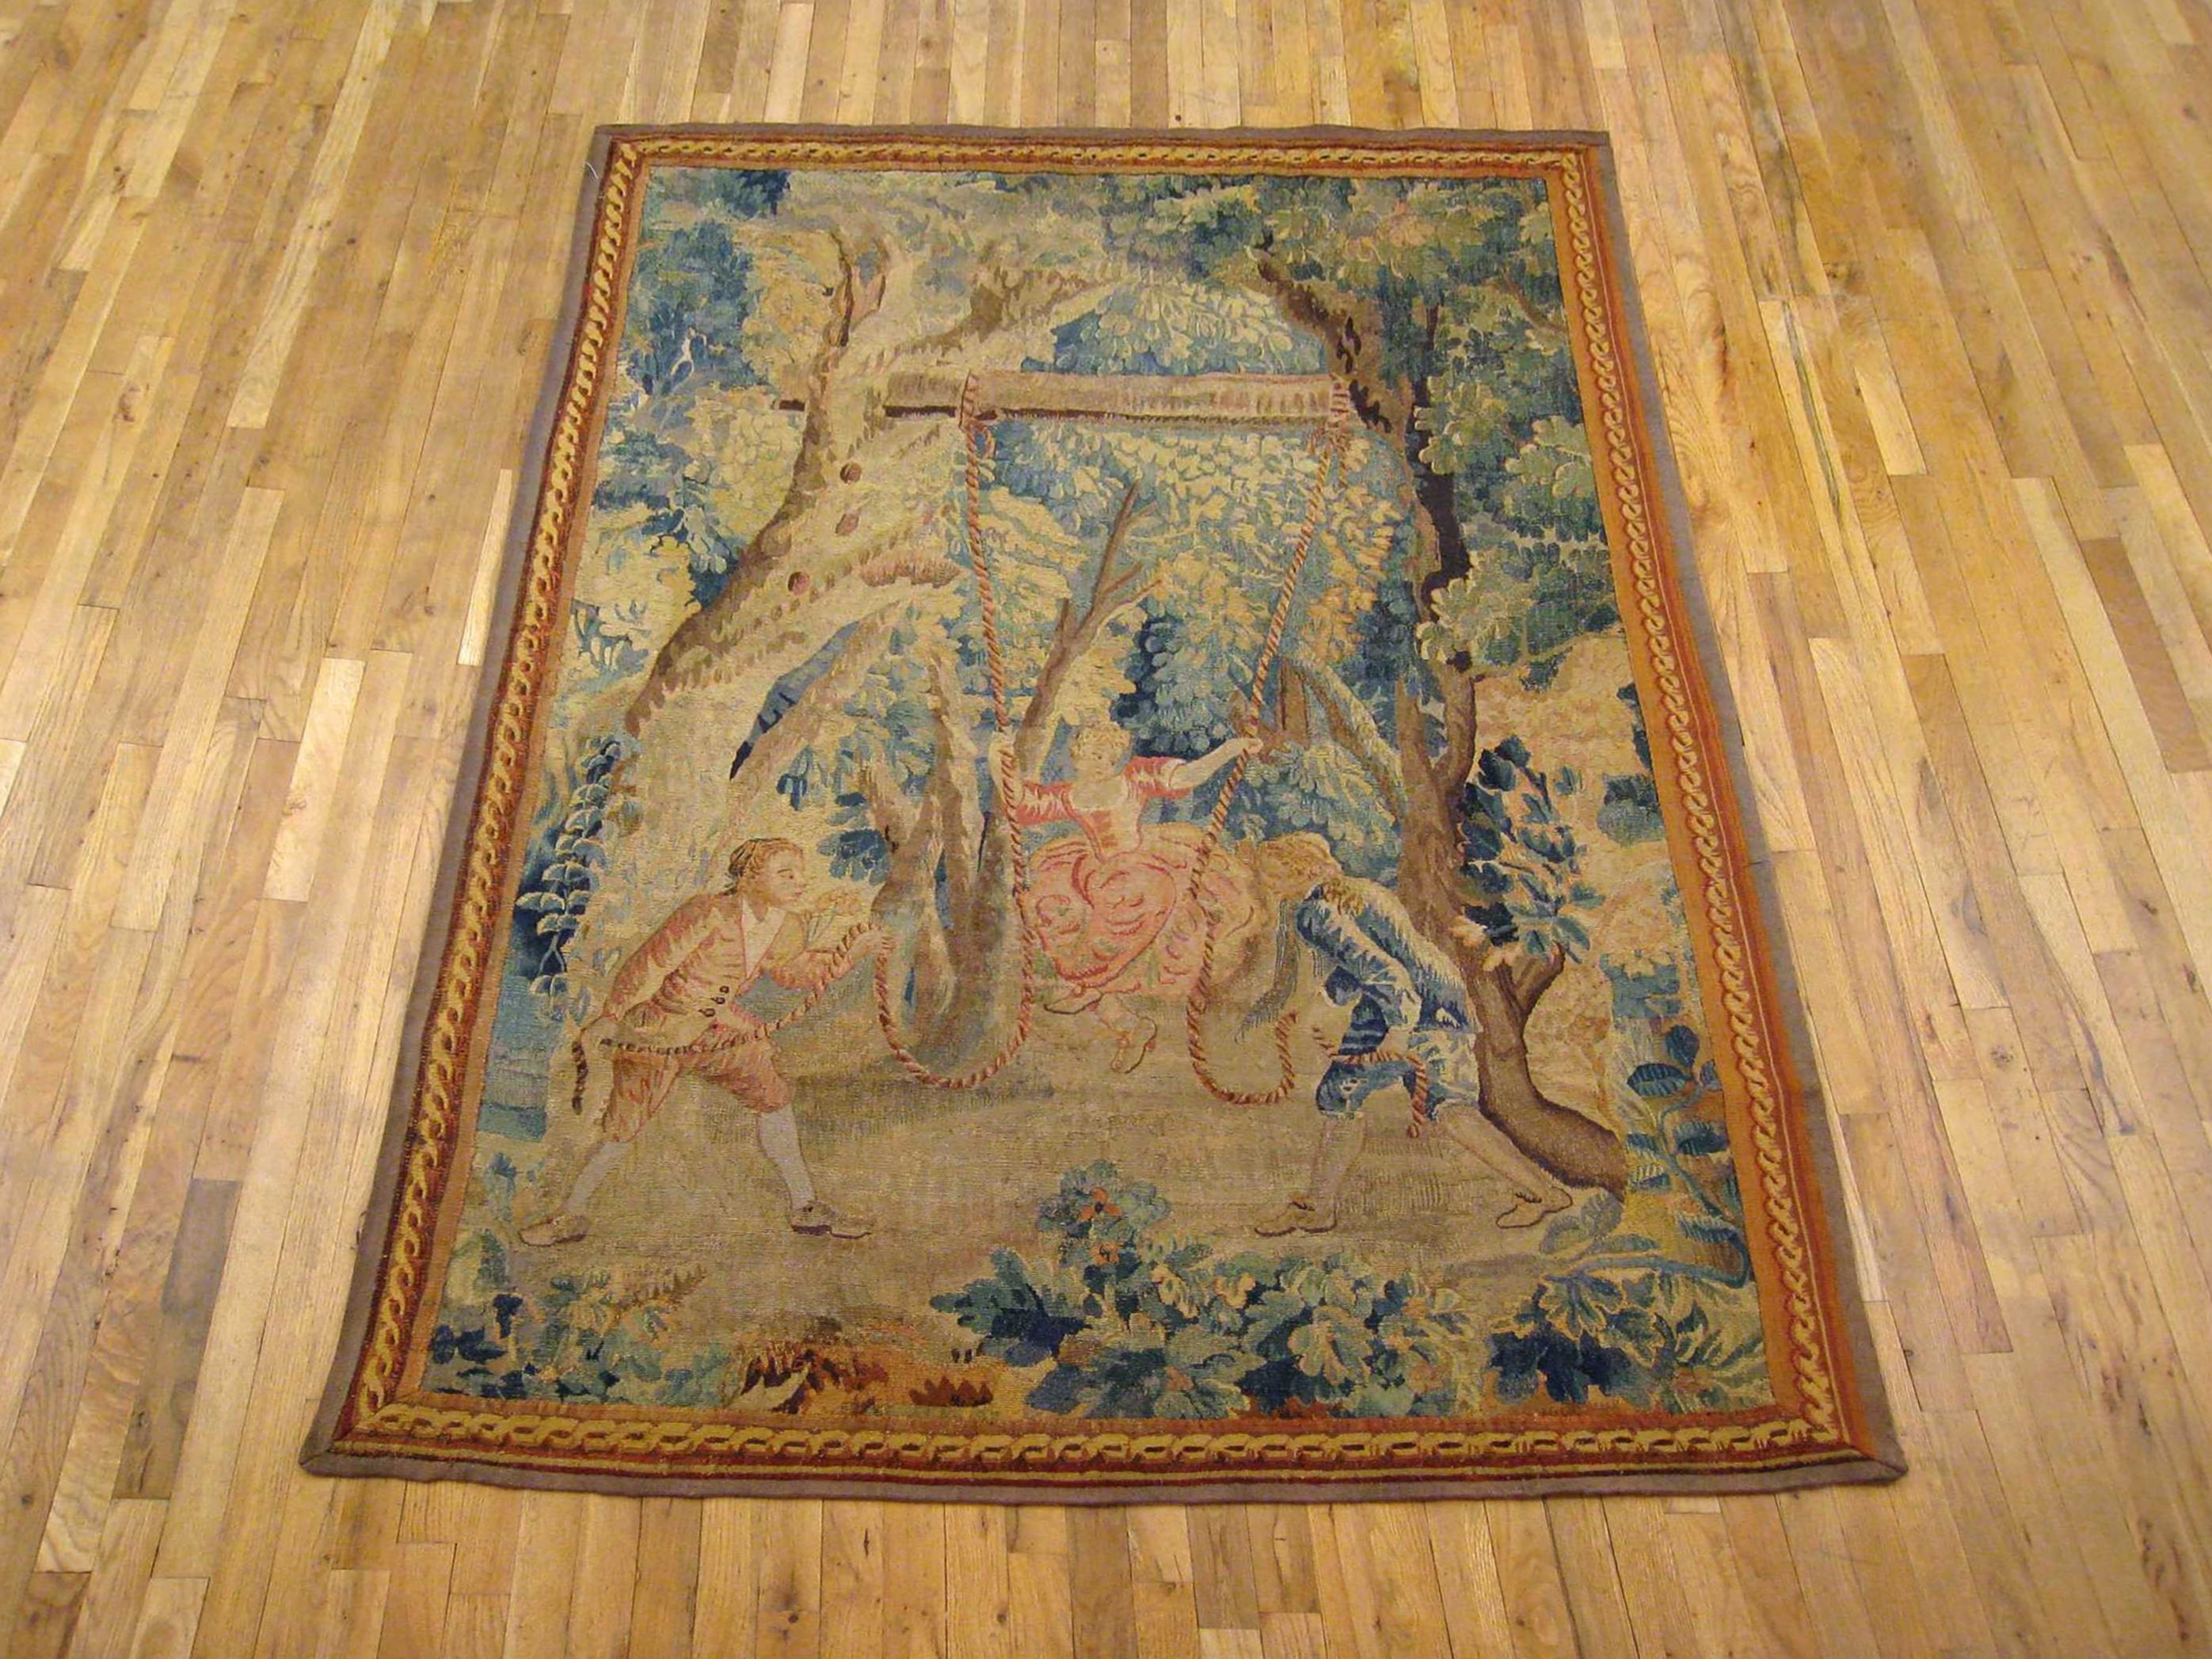 A Flemish rustic tapestry from the 18th century, depicting a charming scene with two young noblemen pulling a young damsel on a swing within a verdant courtyard setting. Enclosed by an elegant ribbon-twist border. Wool with silk inlay. Measures: